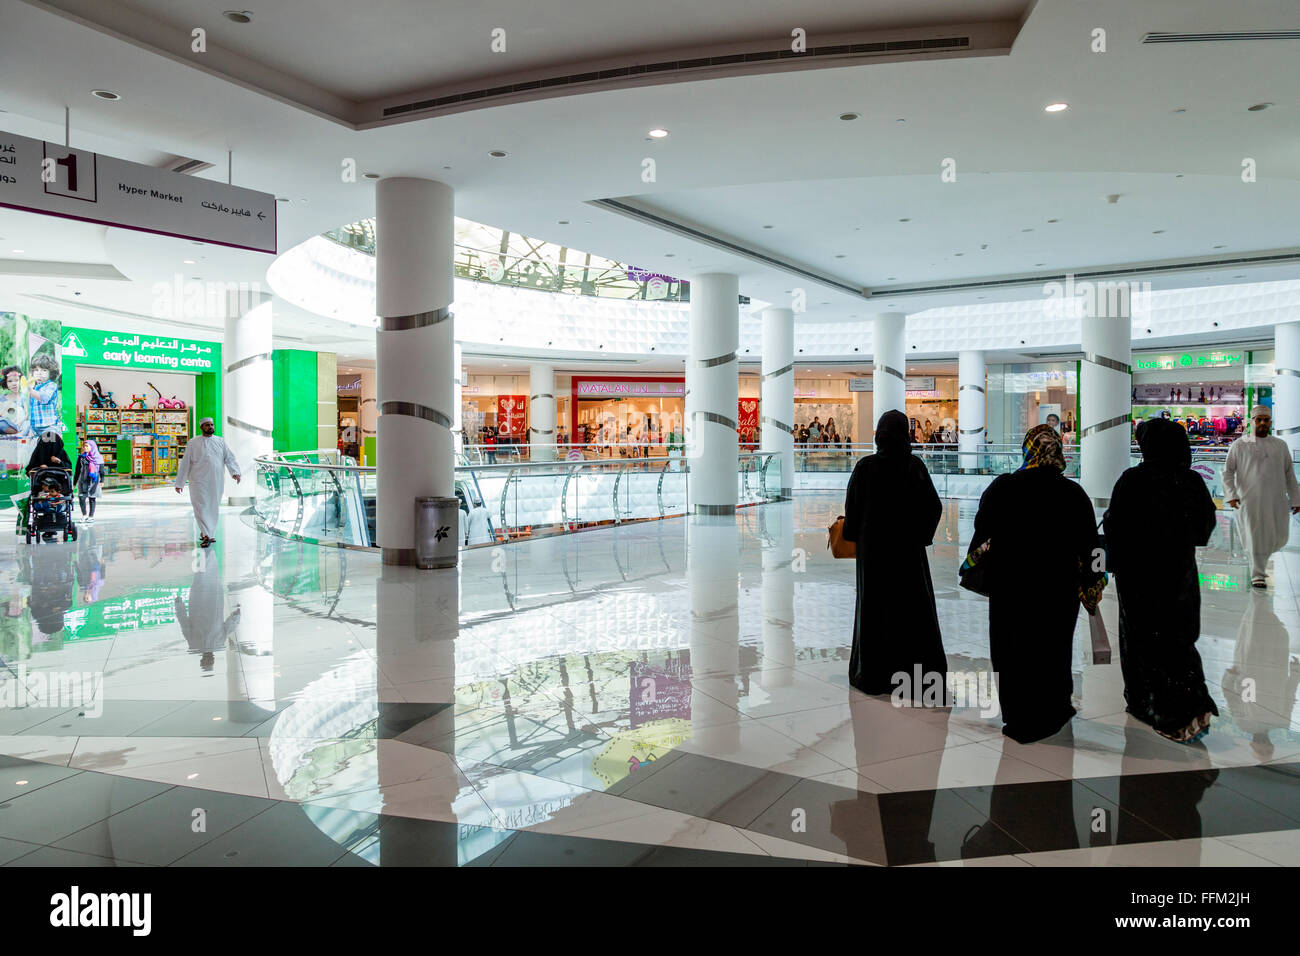 Omani People Shopping In The Oman Avenues Shopping Mall, Muscat, Sultanate Of Oman Stock Photo